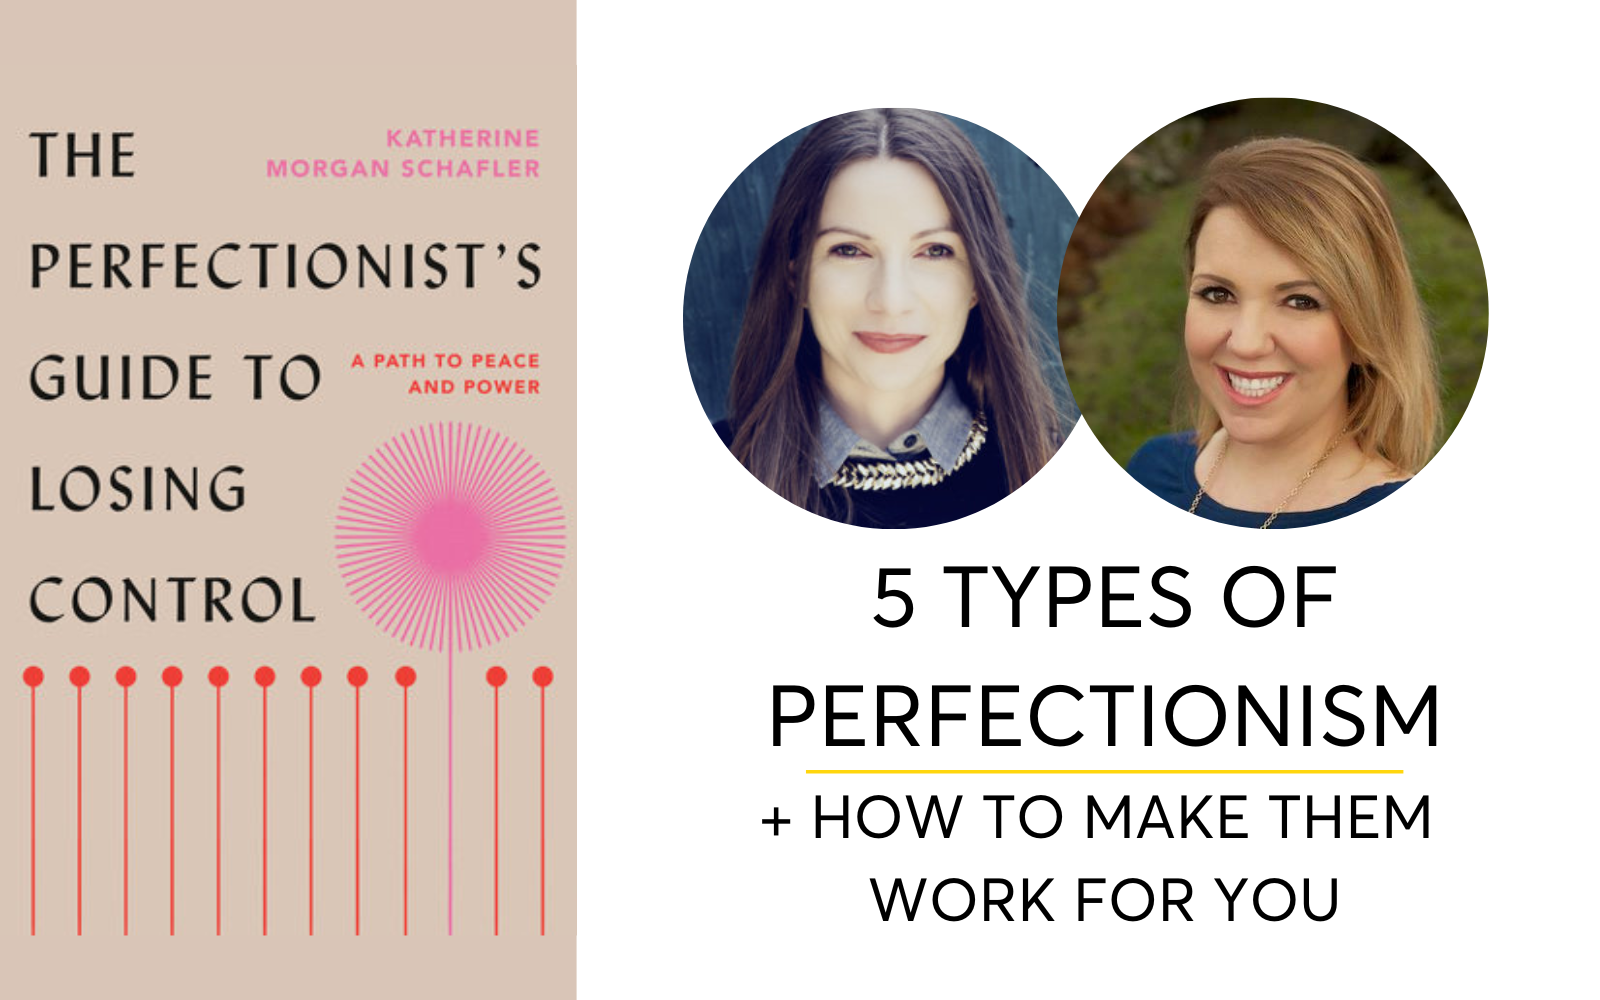 How To Make Perfectionism Work For You